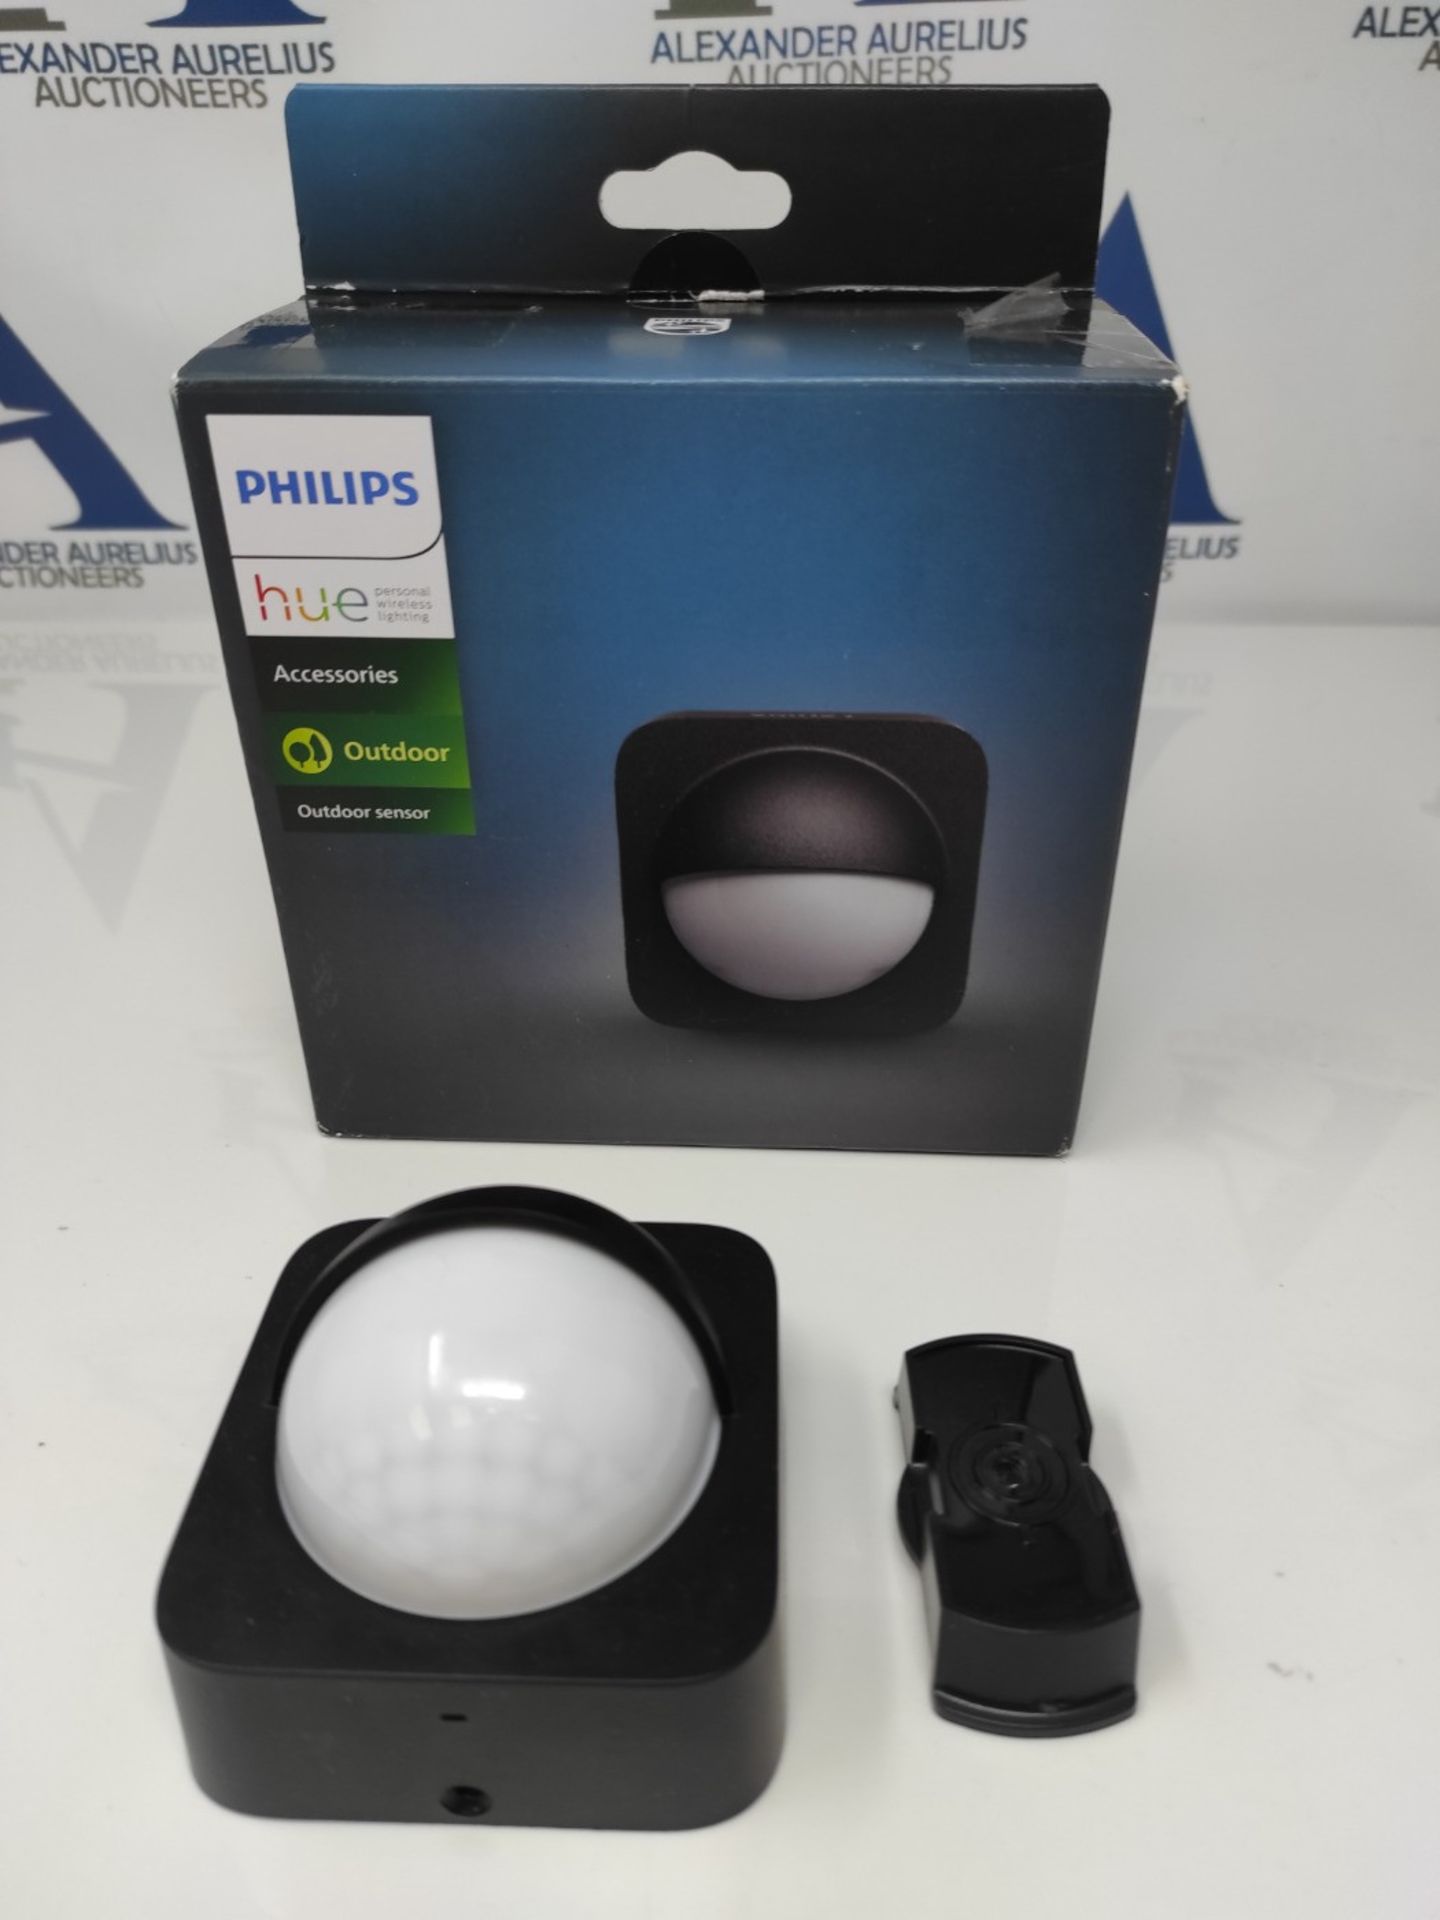 RRP £54.00 Philips Hue Outdoor Motion Sensor. Smart Lighting Accessory for Outdoor Light Control. - Image 2 of 2